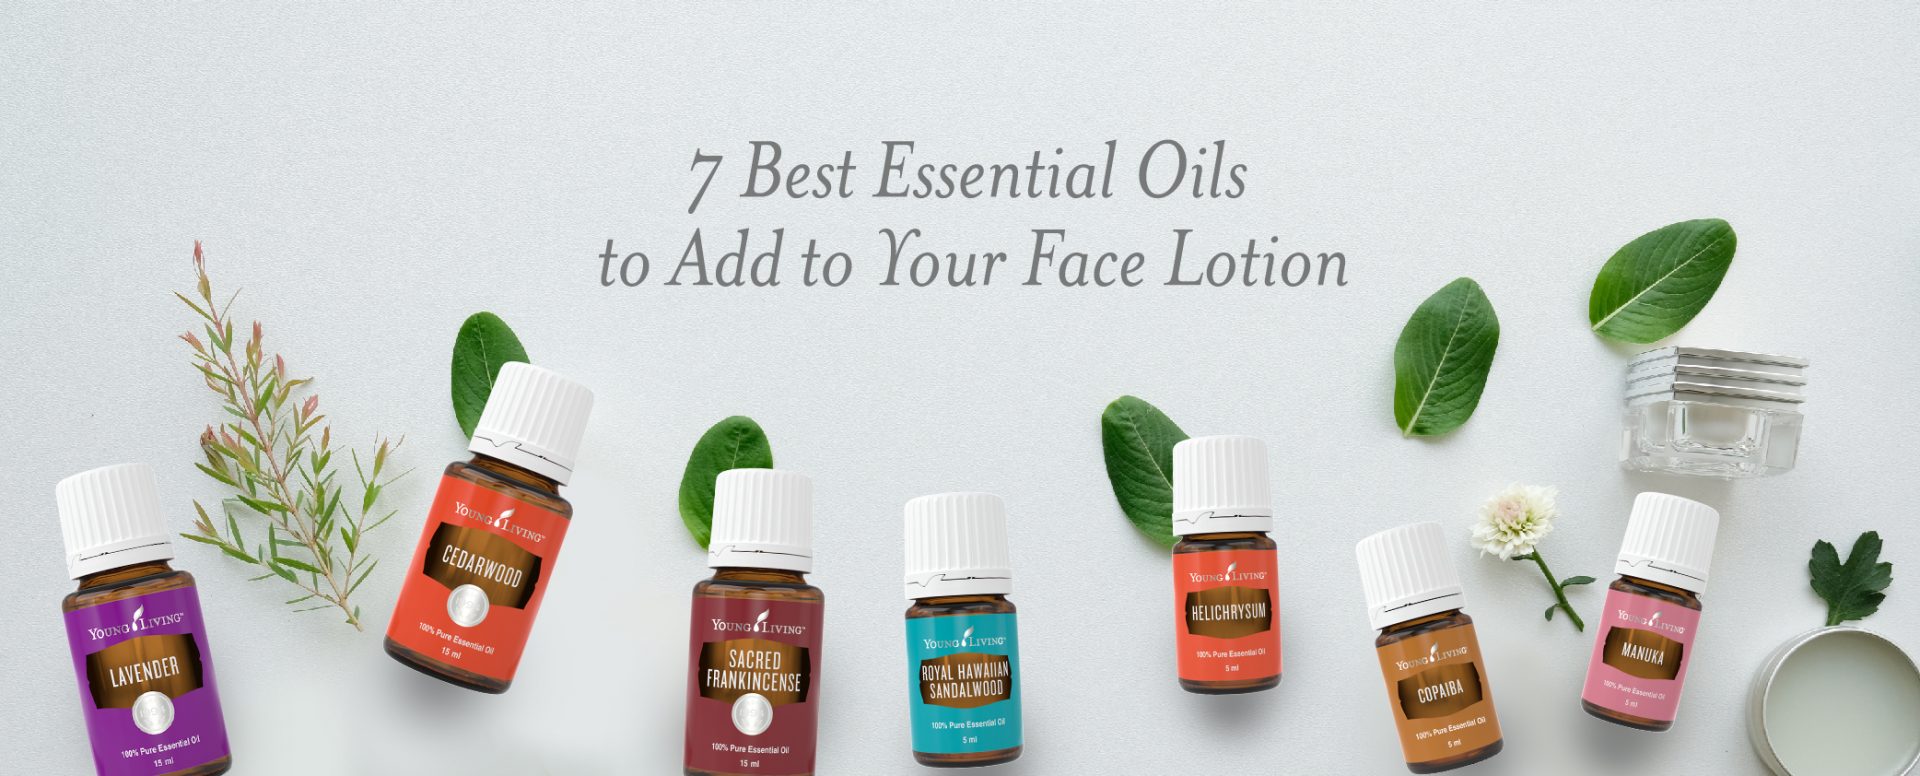 11 Best Essential Oils for Acne